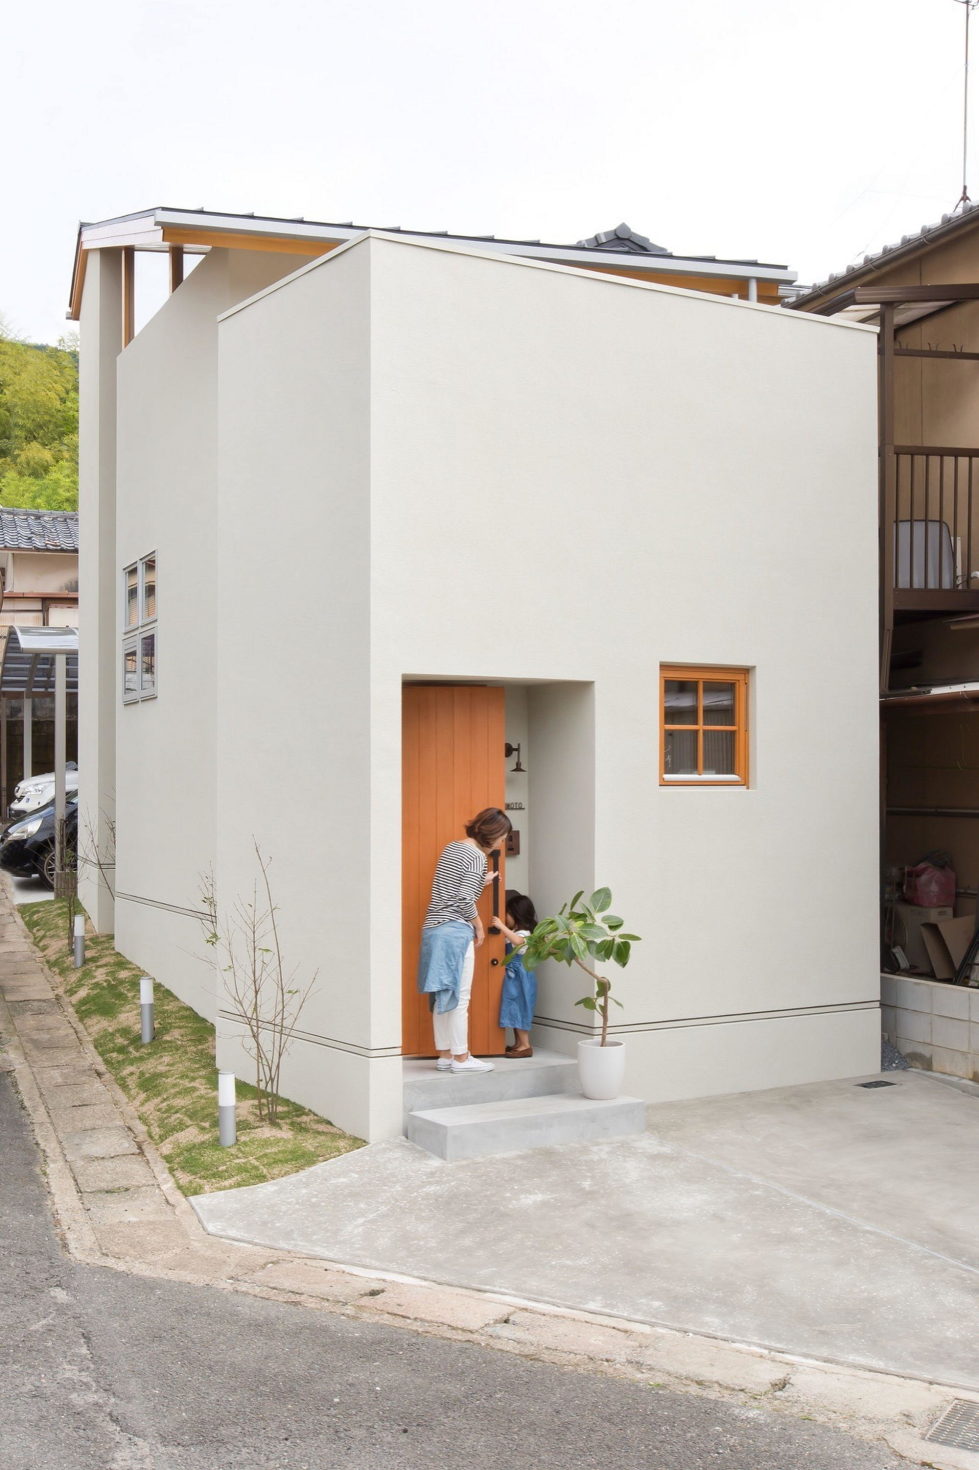 The House In Nipponese Minimalism In Kyoto By ALTS Design Office 2